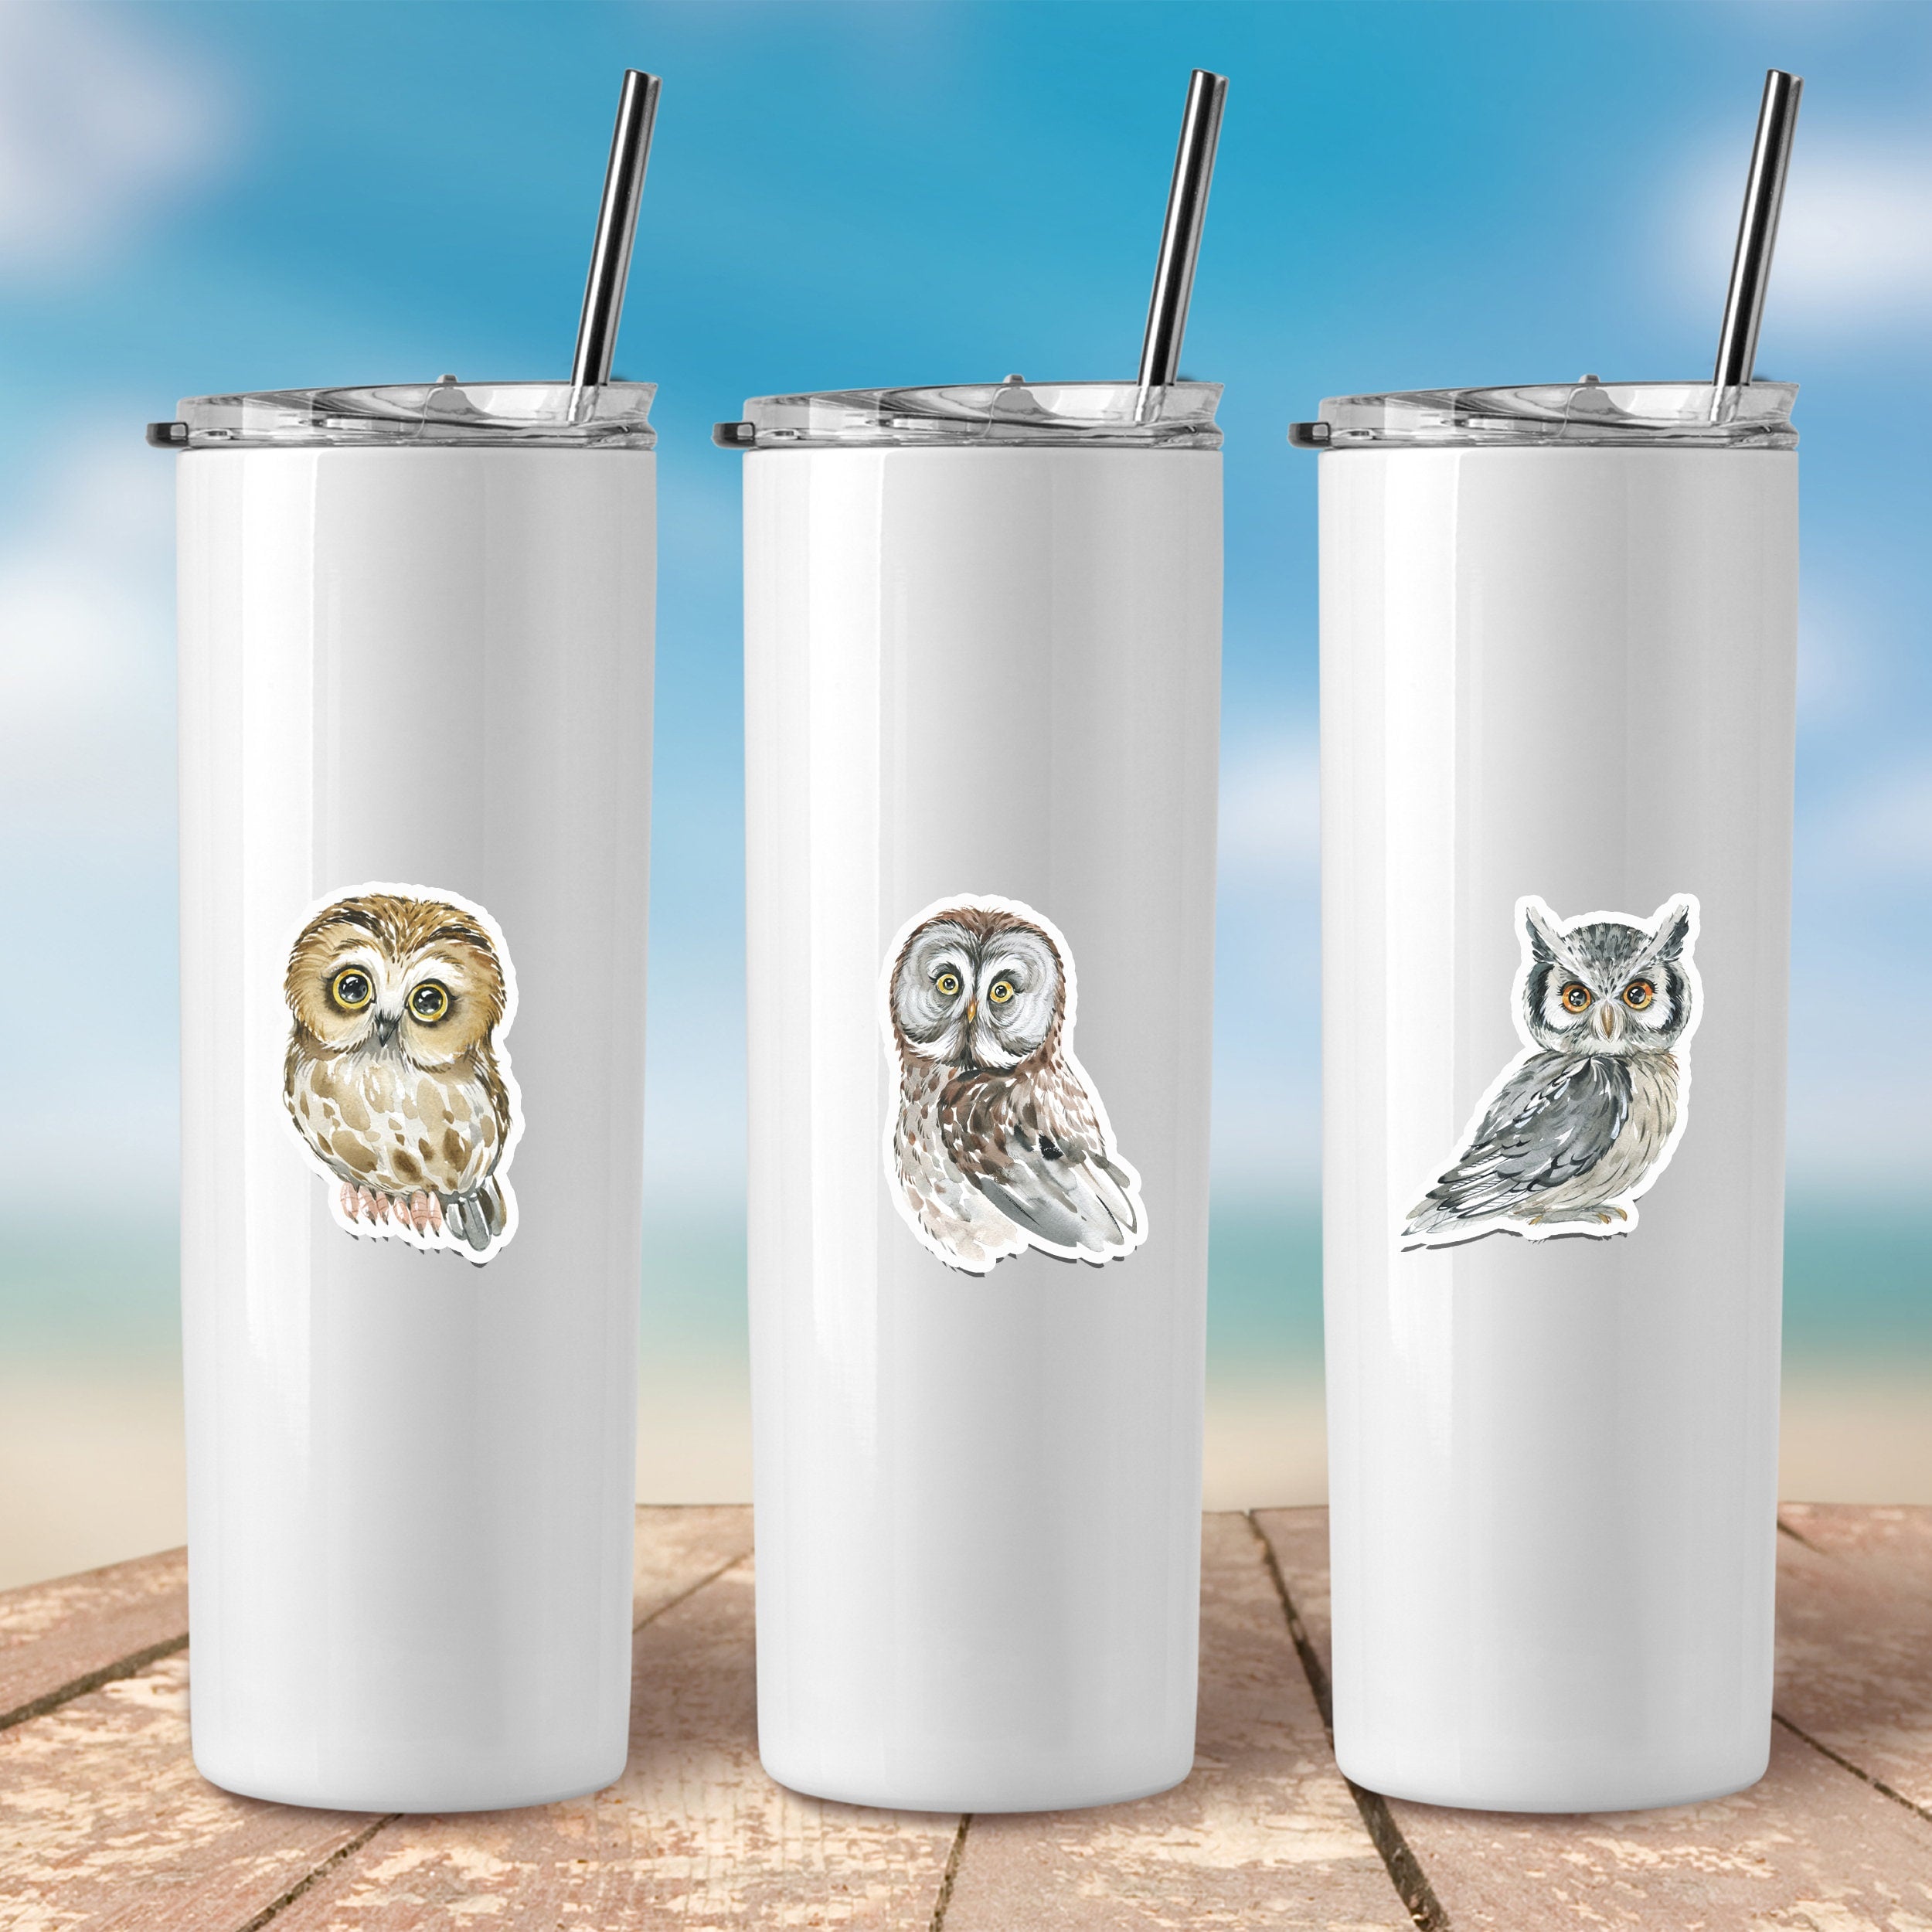 Wise and Whimsical Owl Stickers - Set of 25 Varied Owl Decals for Nature Lovers and Nighttime Mystique Enthusiasts